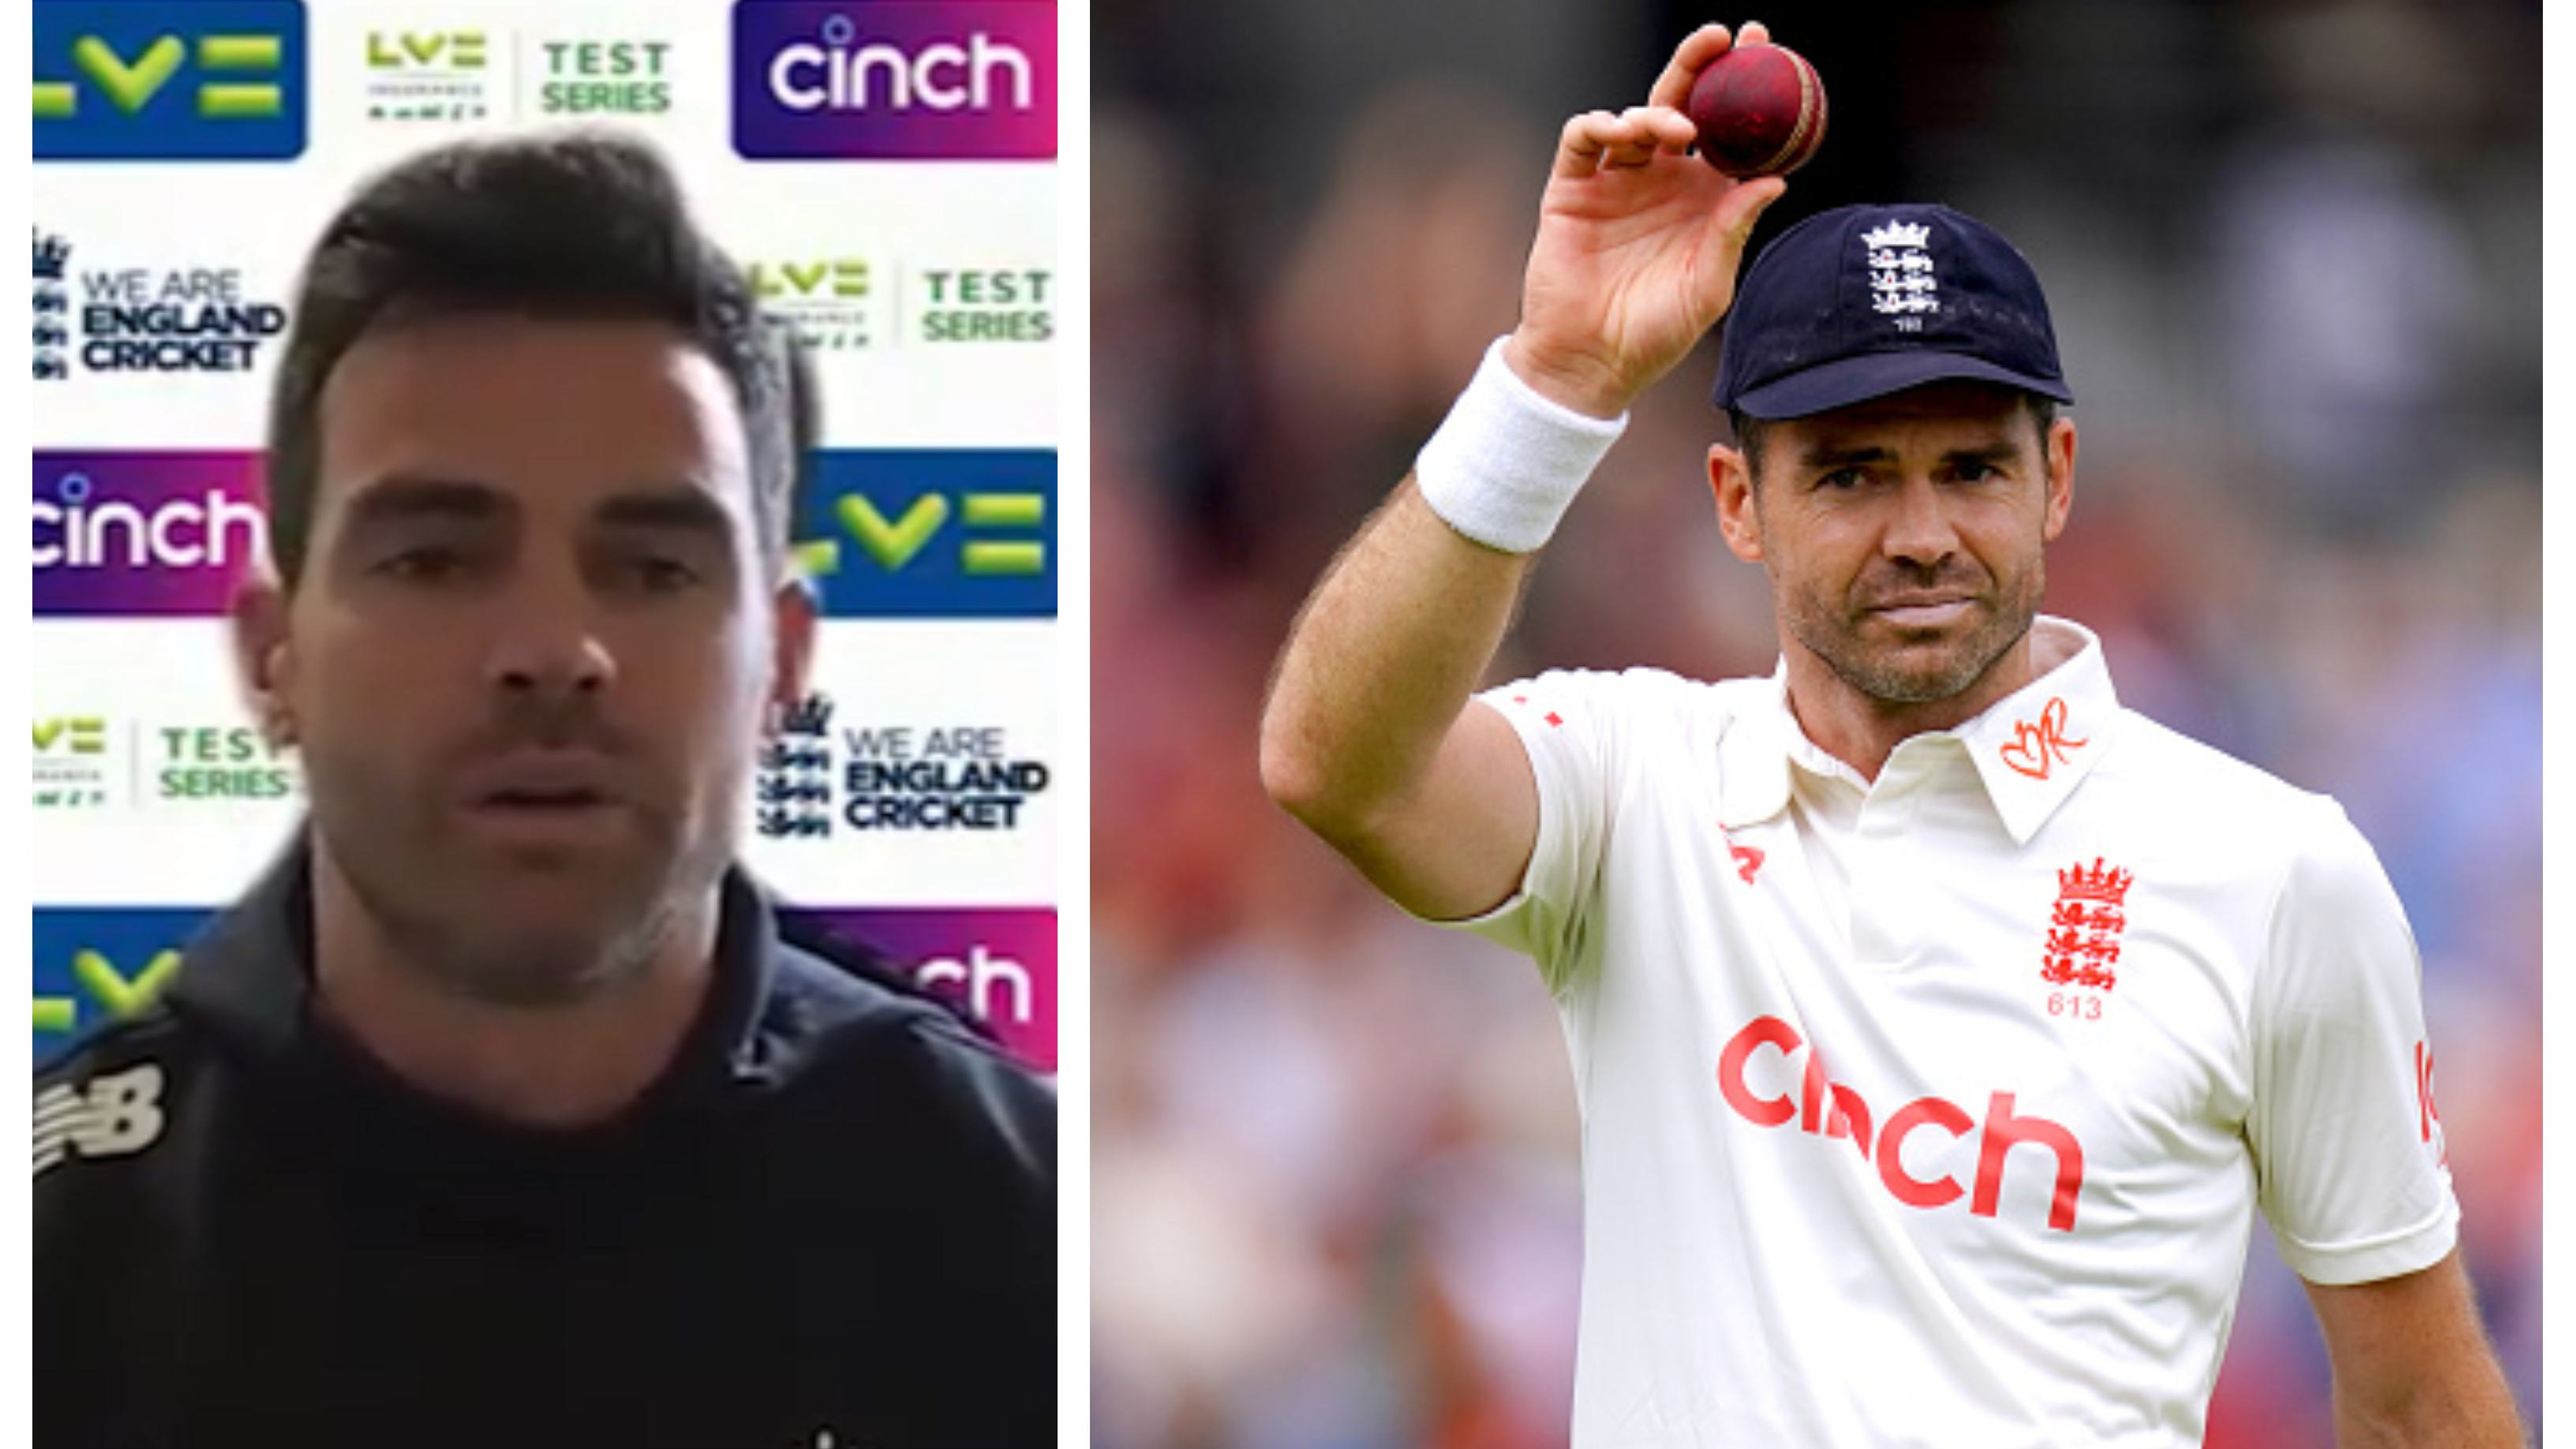 ENG v IND 2021: ‘It just seemed to bring the best out of me’, James Anderson after his 7th fifer at Lord’s